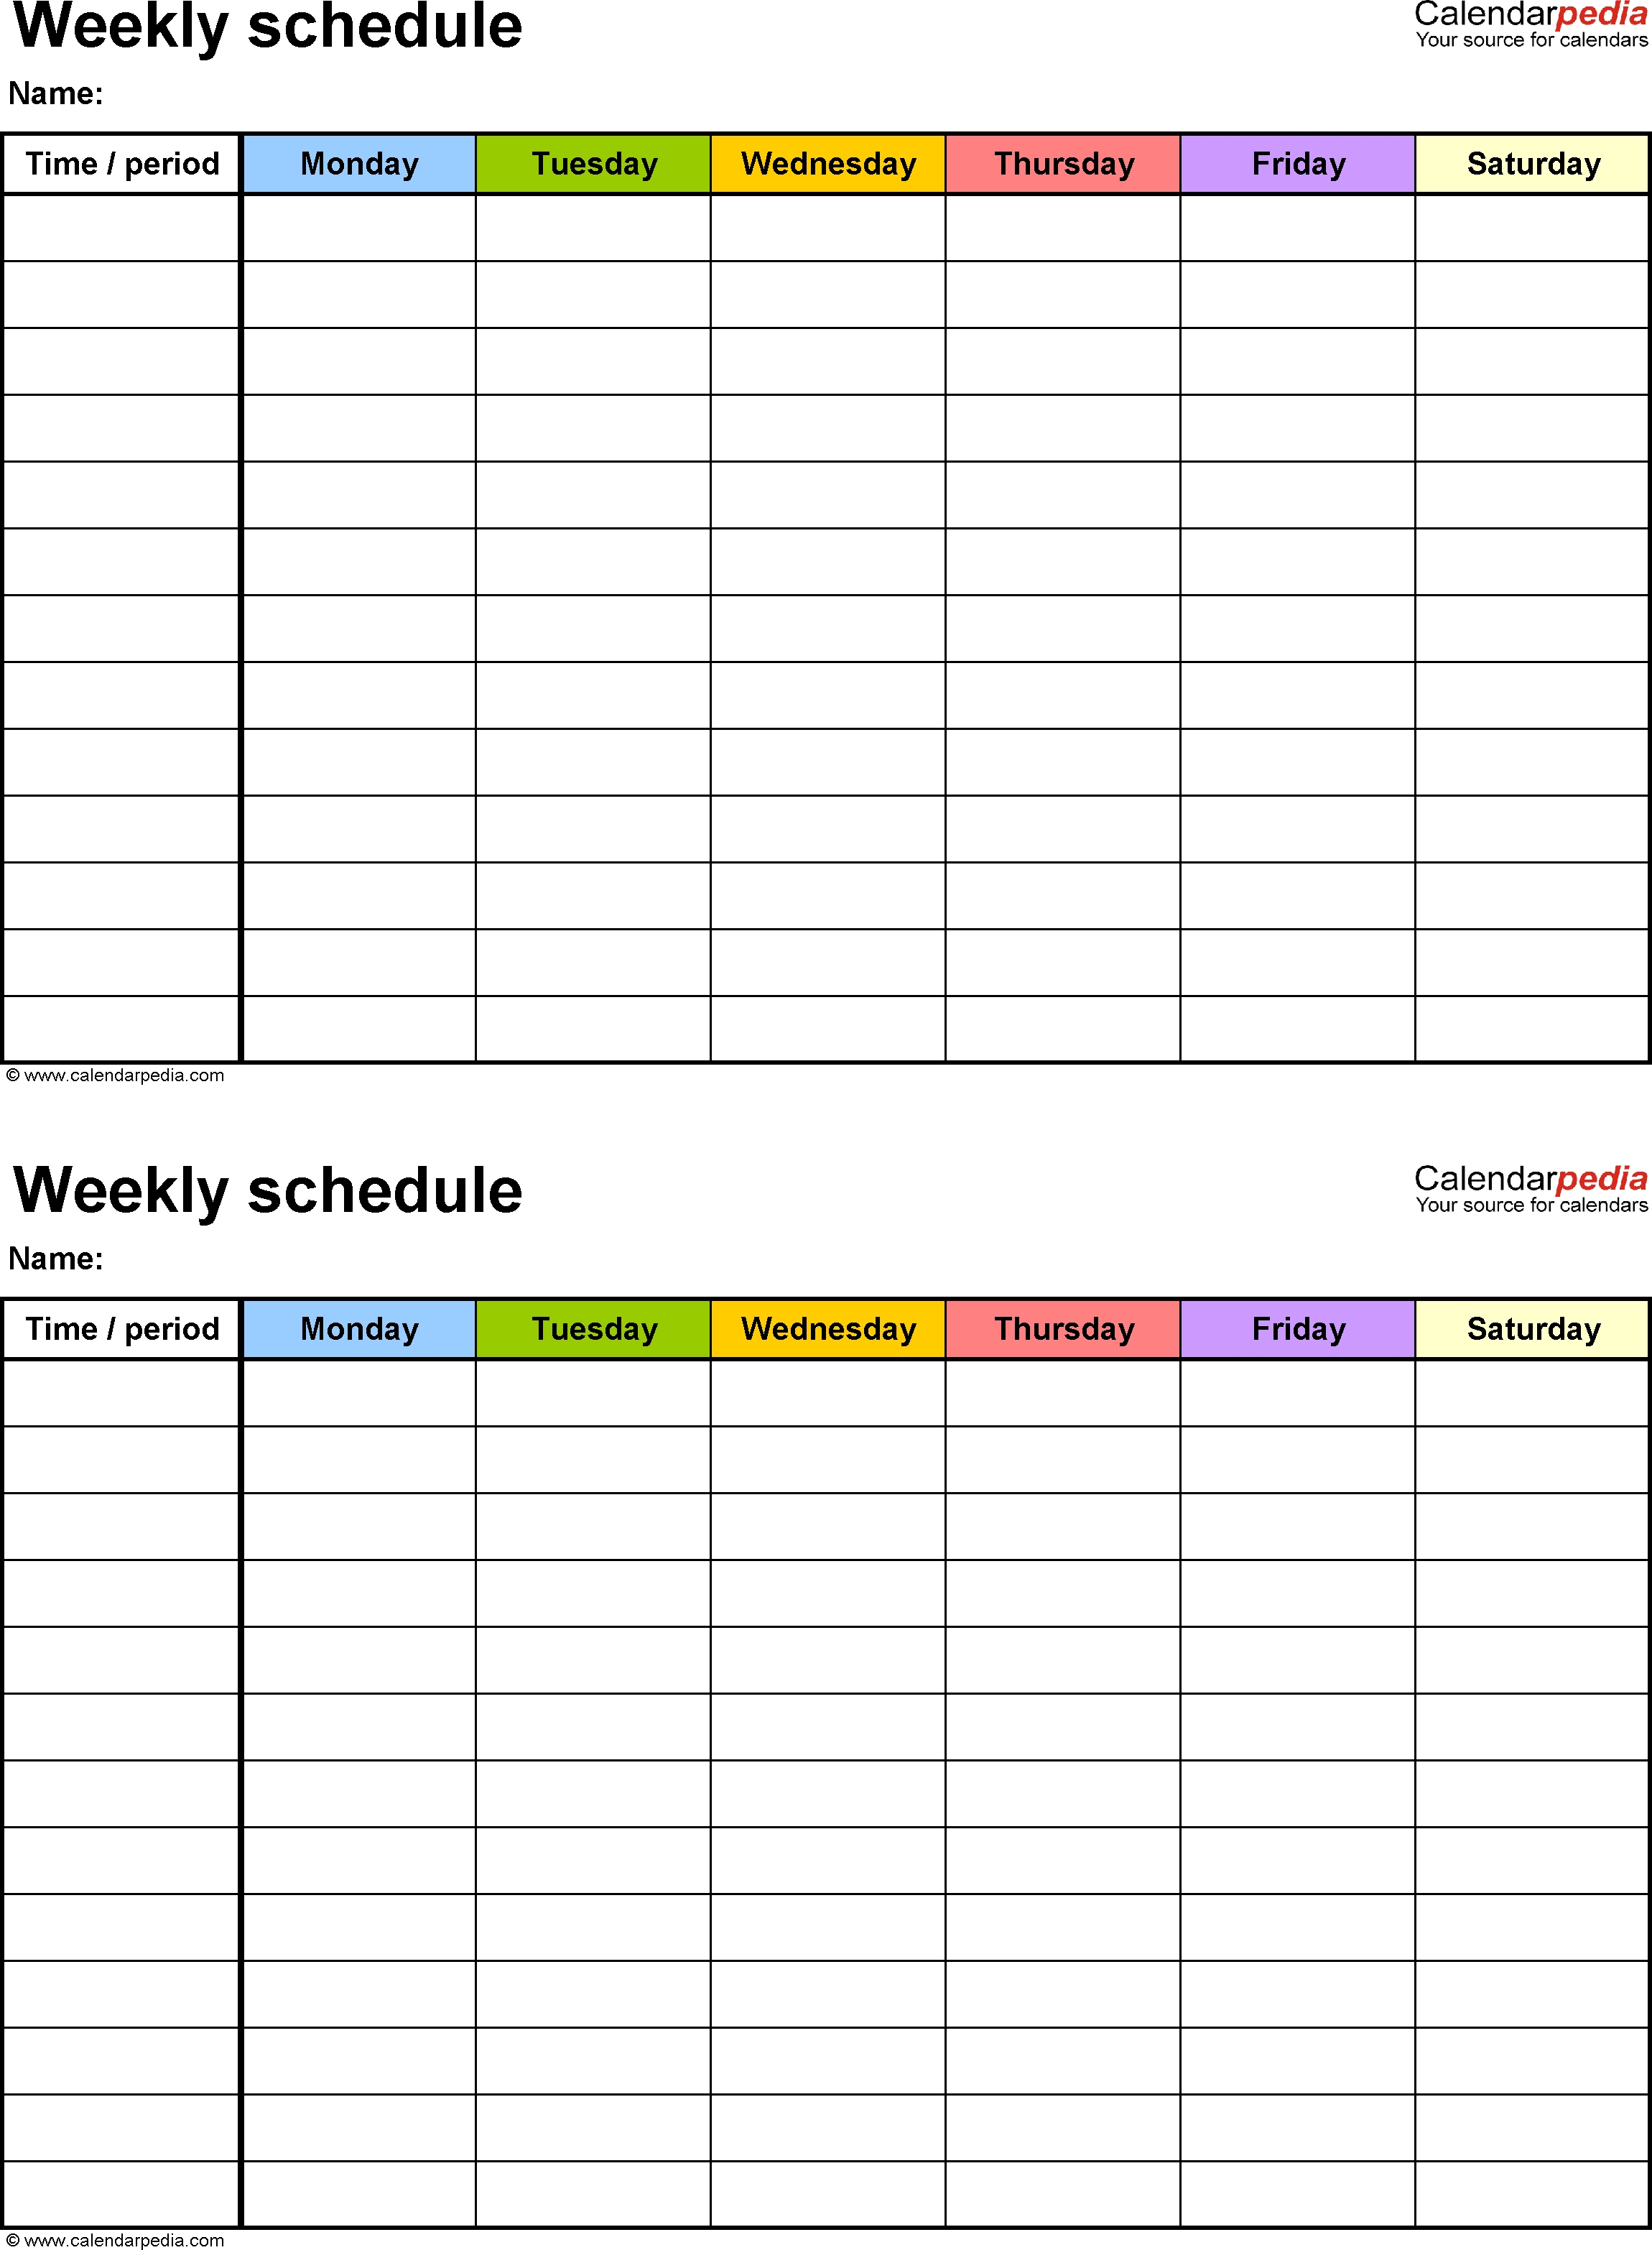 Free Weekly Schedule Templates For Word - 18 Templates with Free Template For Weekly Schedule